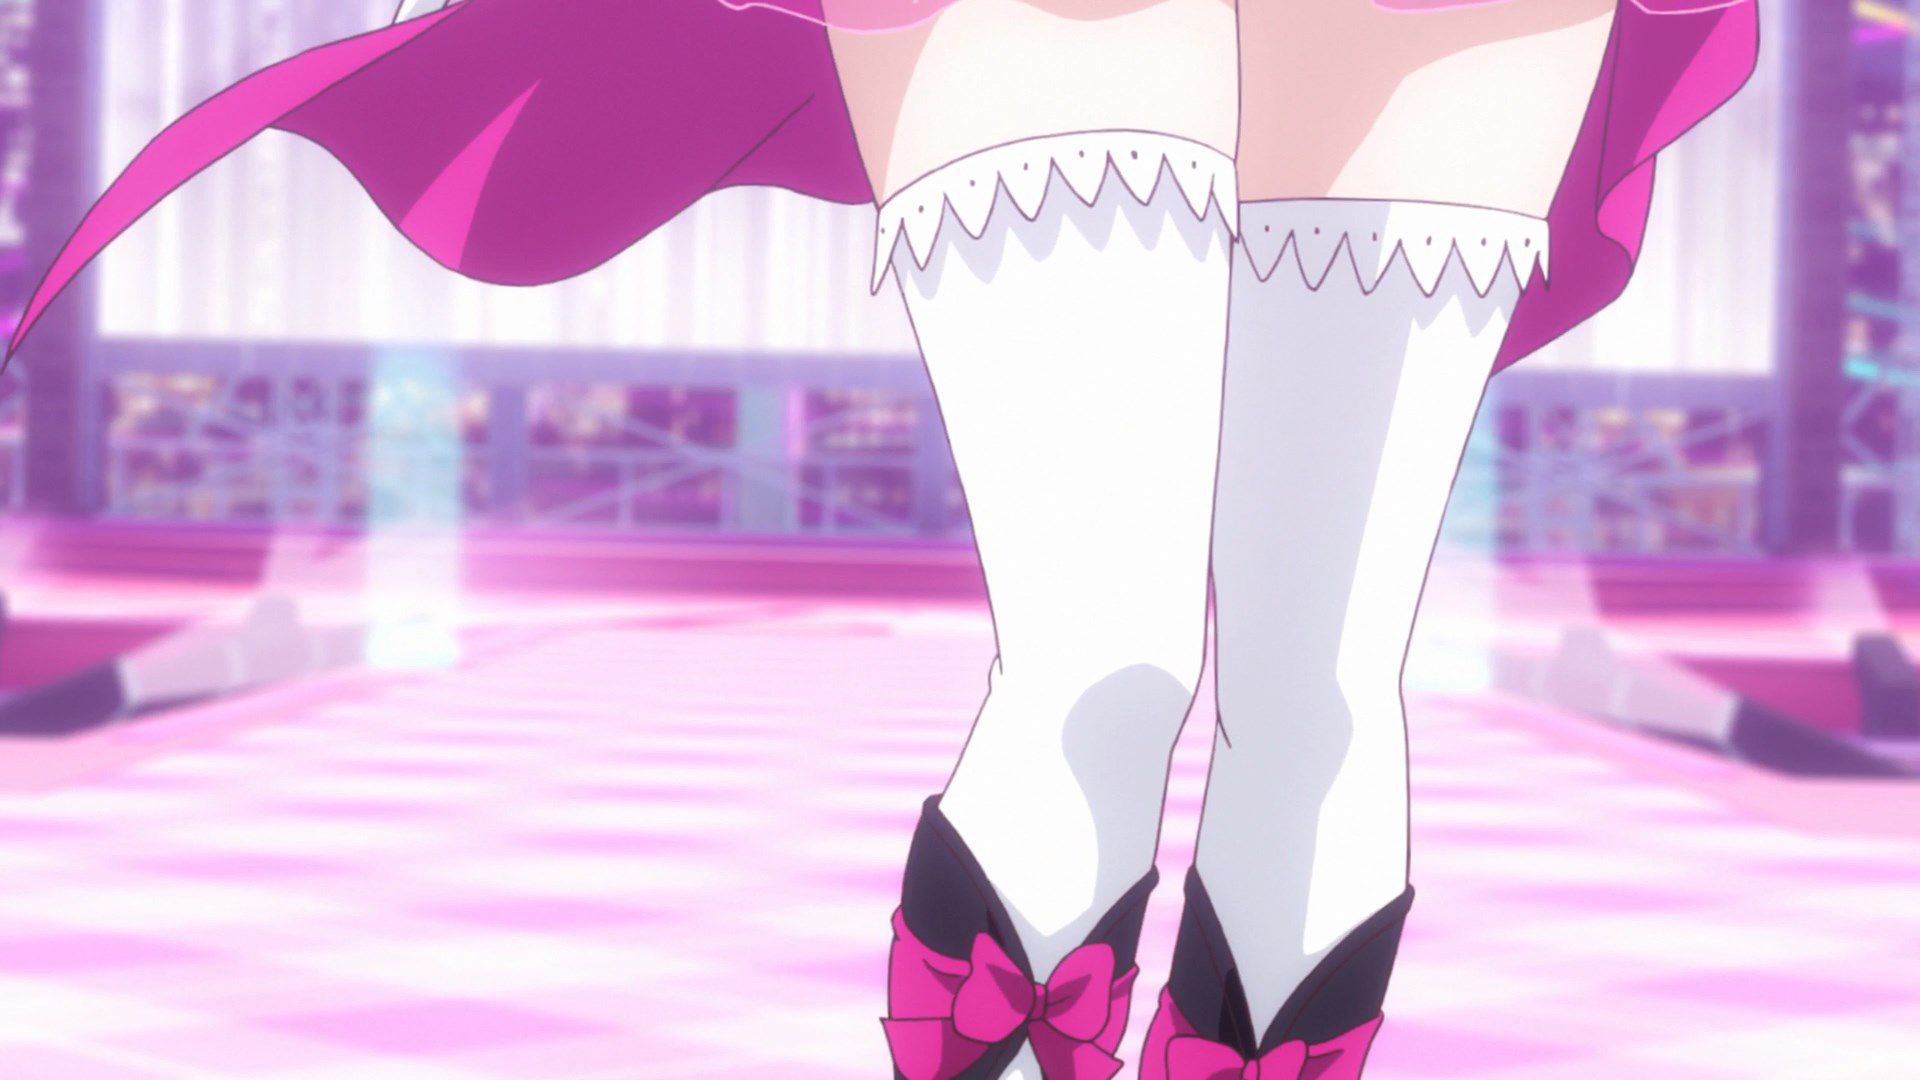 [God images] "love live! ' Μm ' PV's leg is too erotic everyone wakes up to a leg fetish of wwwww 77